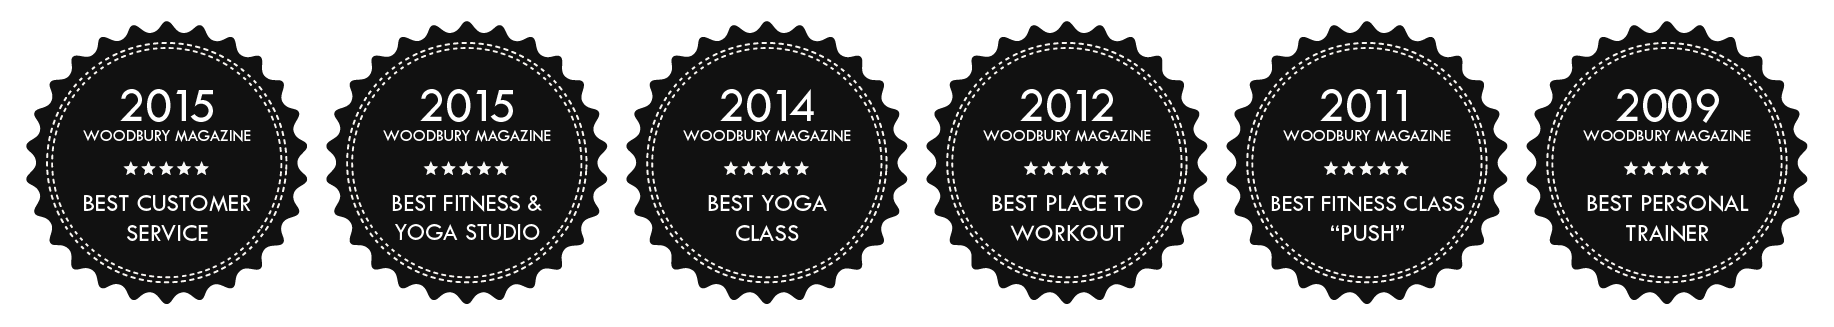 Awards Energy has won for being a great place to exercise and workout